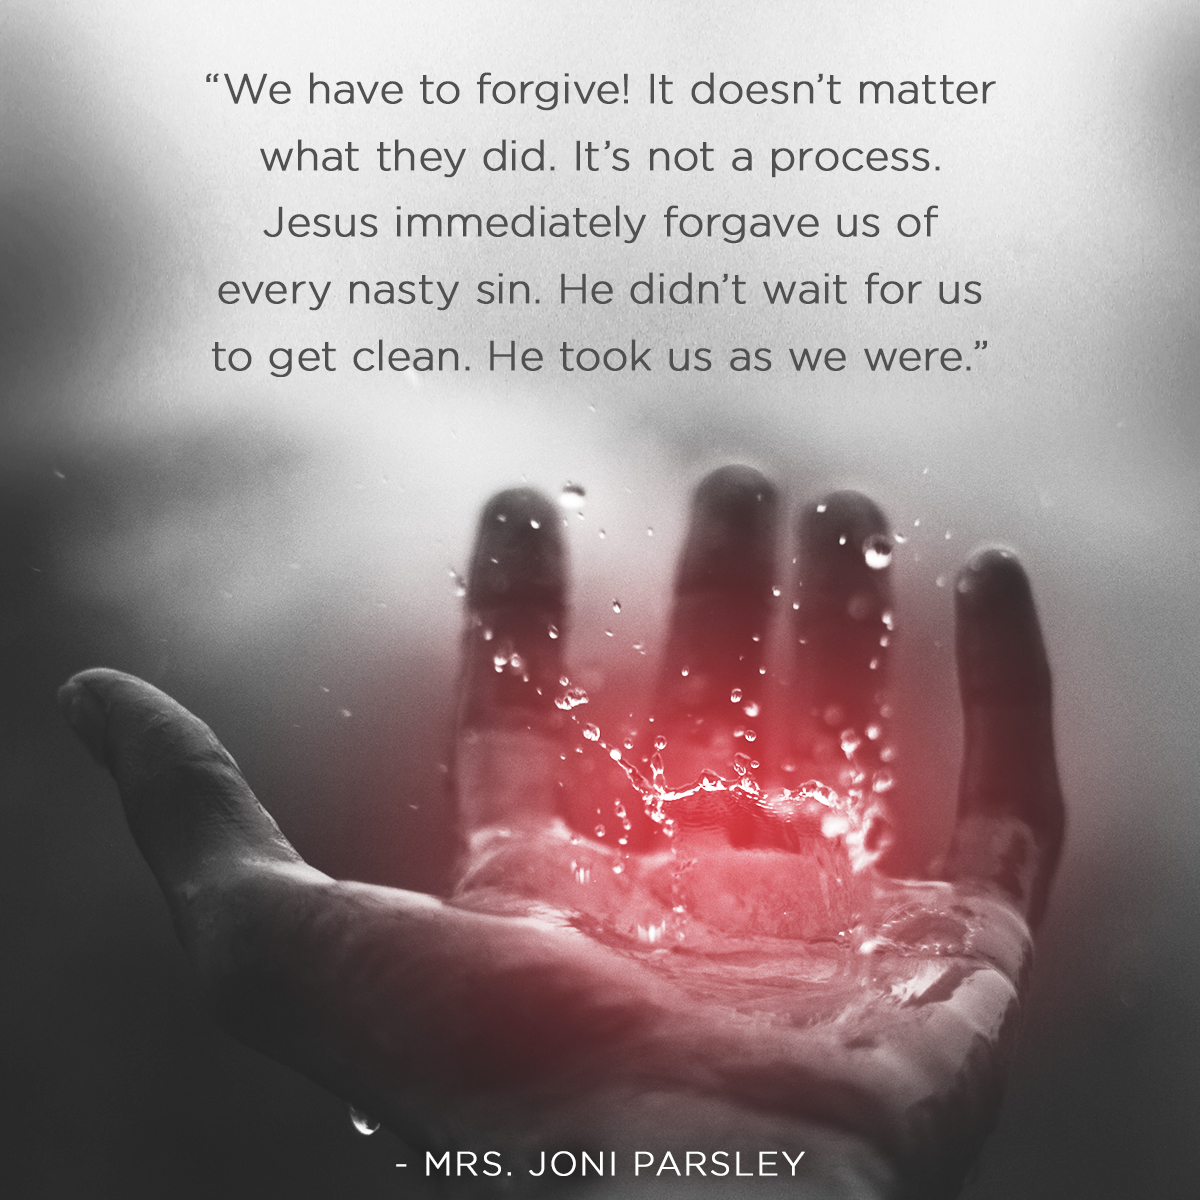 “We have to forgive! It doesn’t matter what they did. It’s not a process. Jesus immediately forgave us of every nasty sin. He didn’t wait for us to get clean. He took us as we were. ” – Ms. Joni Parsley